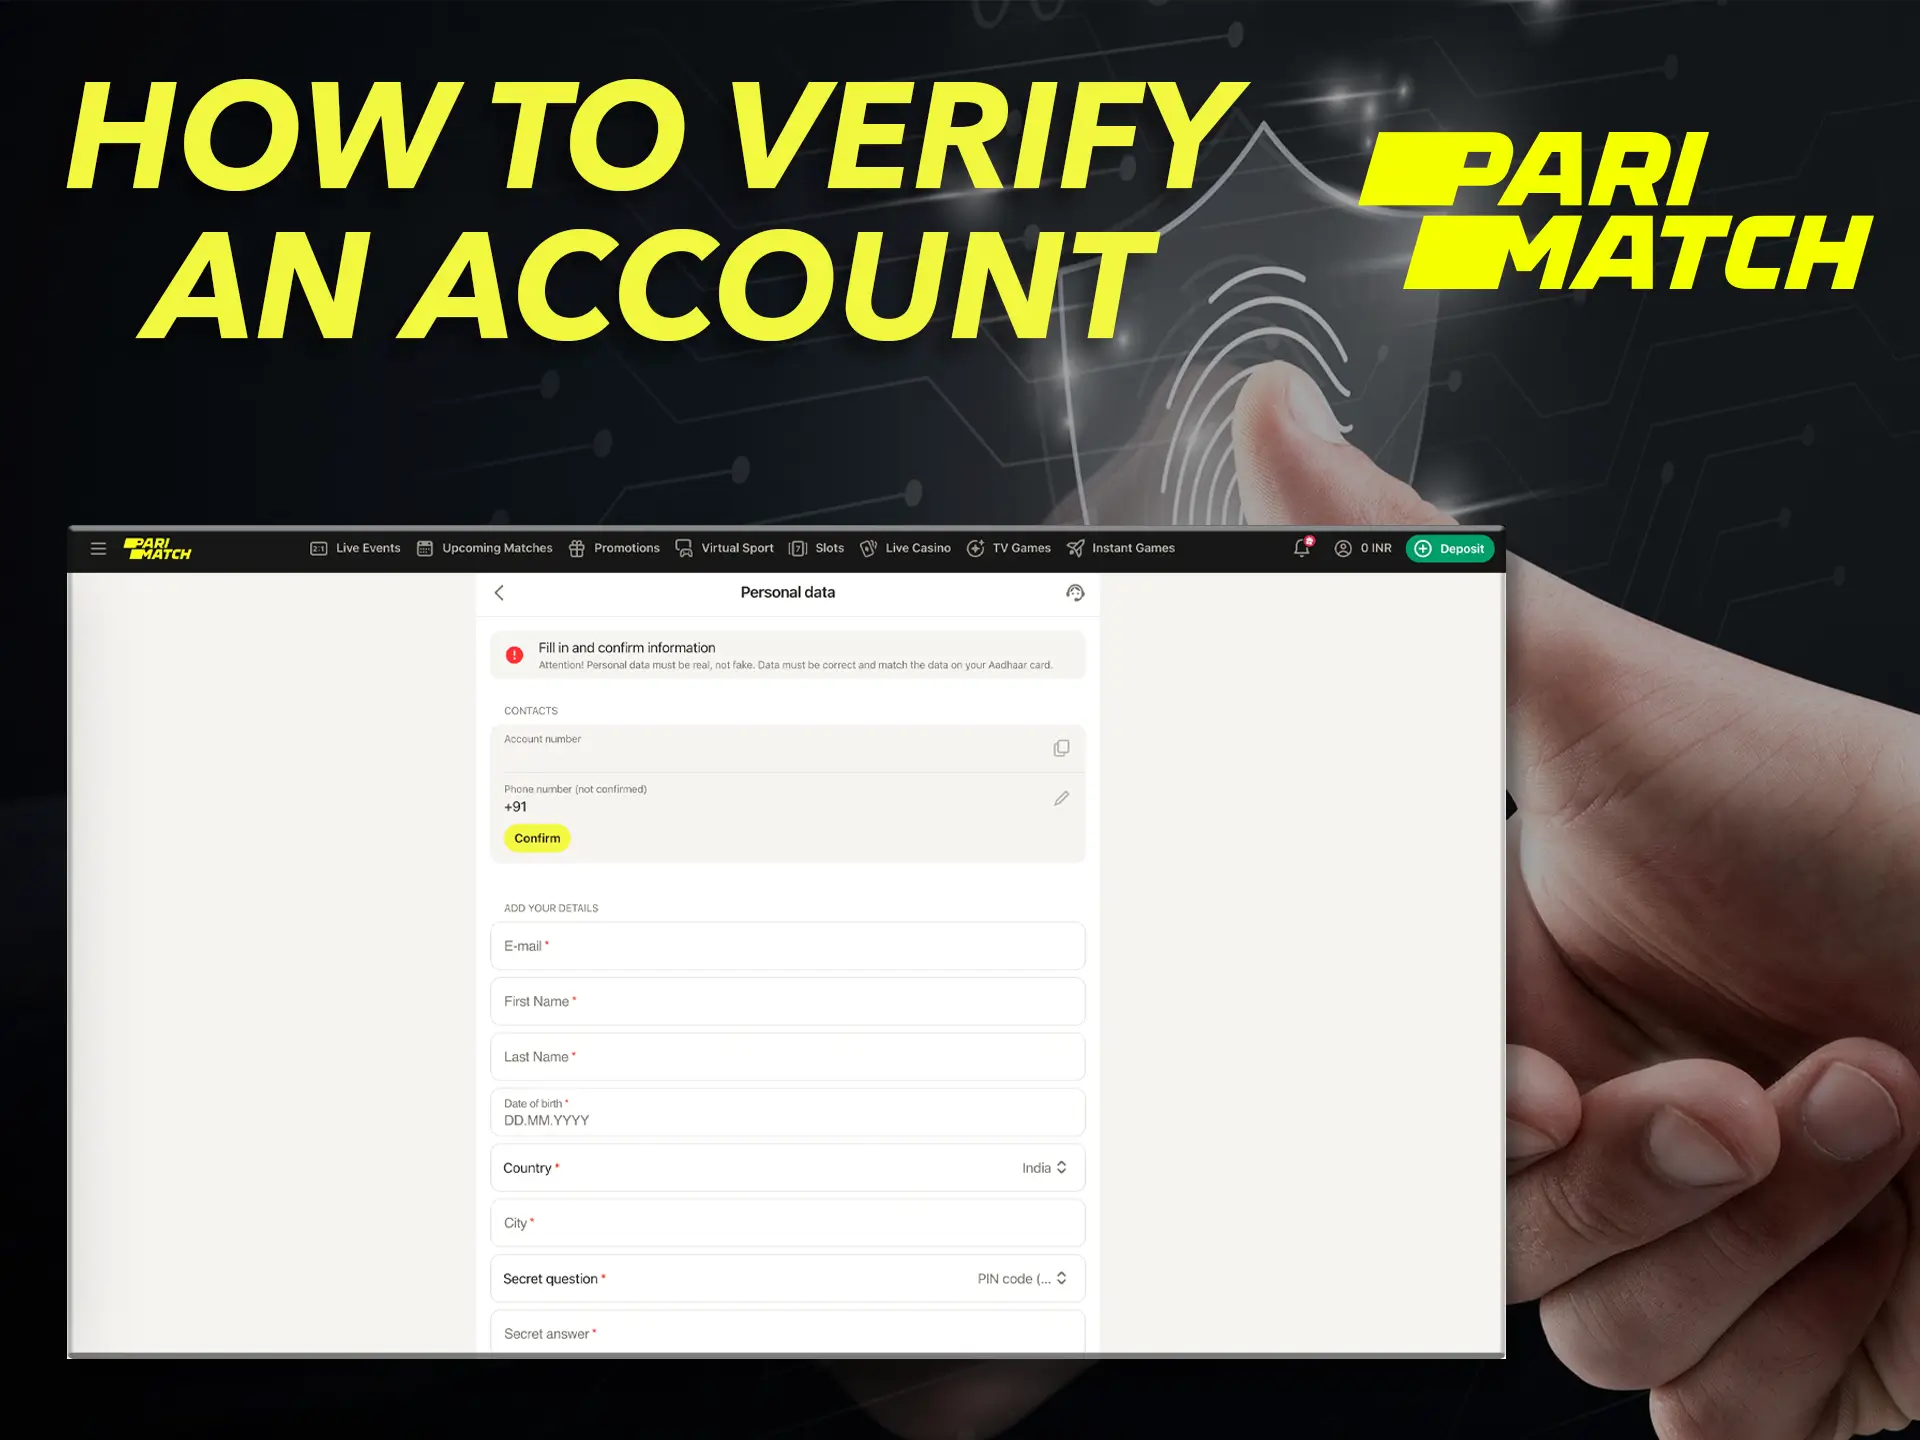 Be sure to confirm your account to access the main features of Parimatch Casino.